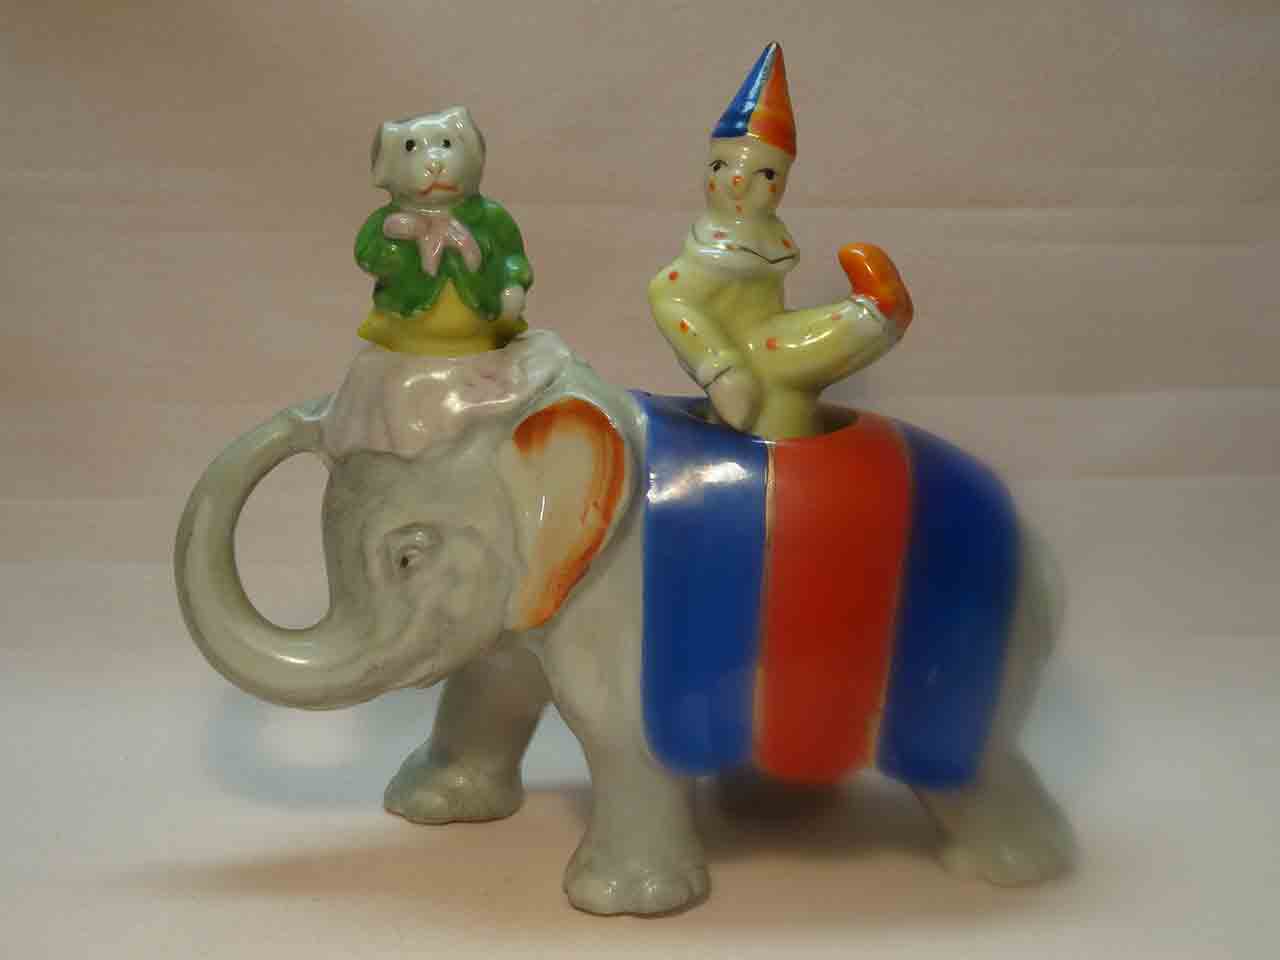 Walking elephant nodder with circus clown and dog as salt and pepper shakers